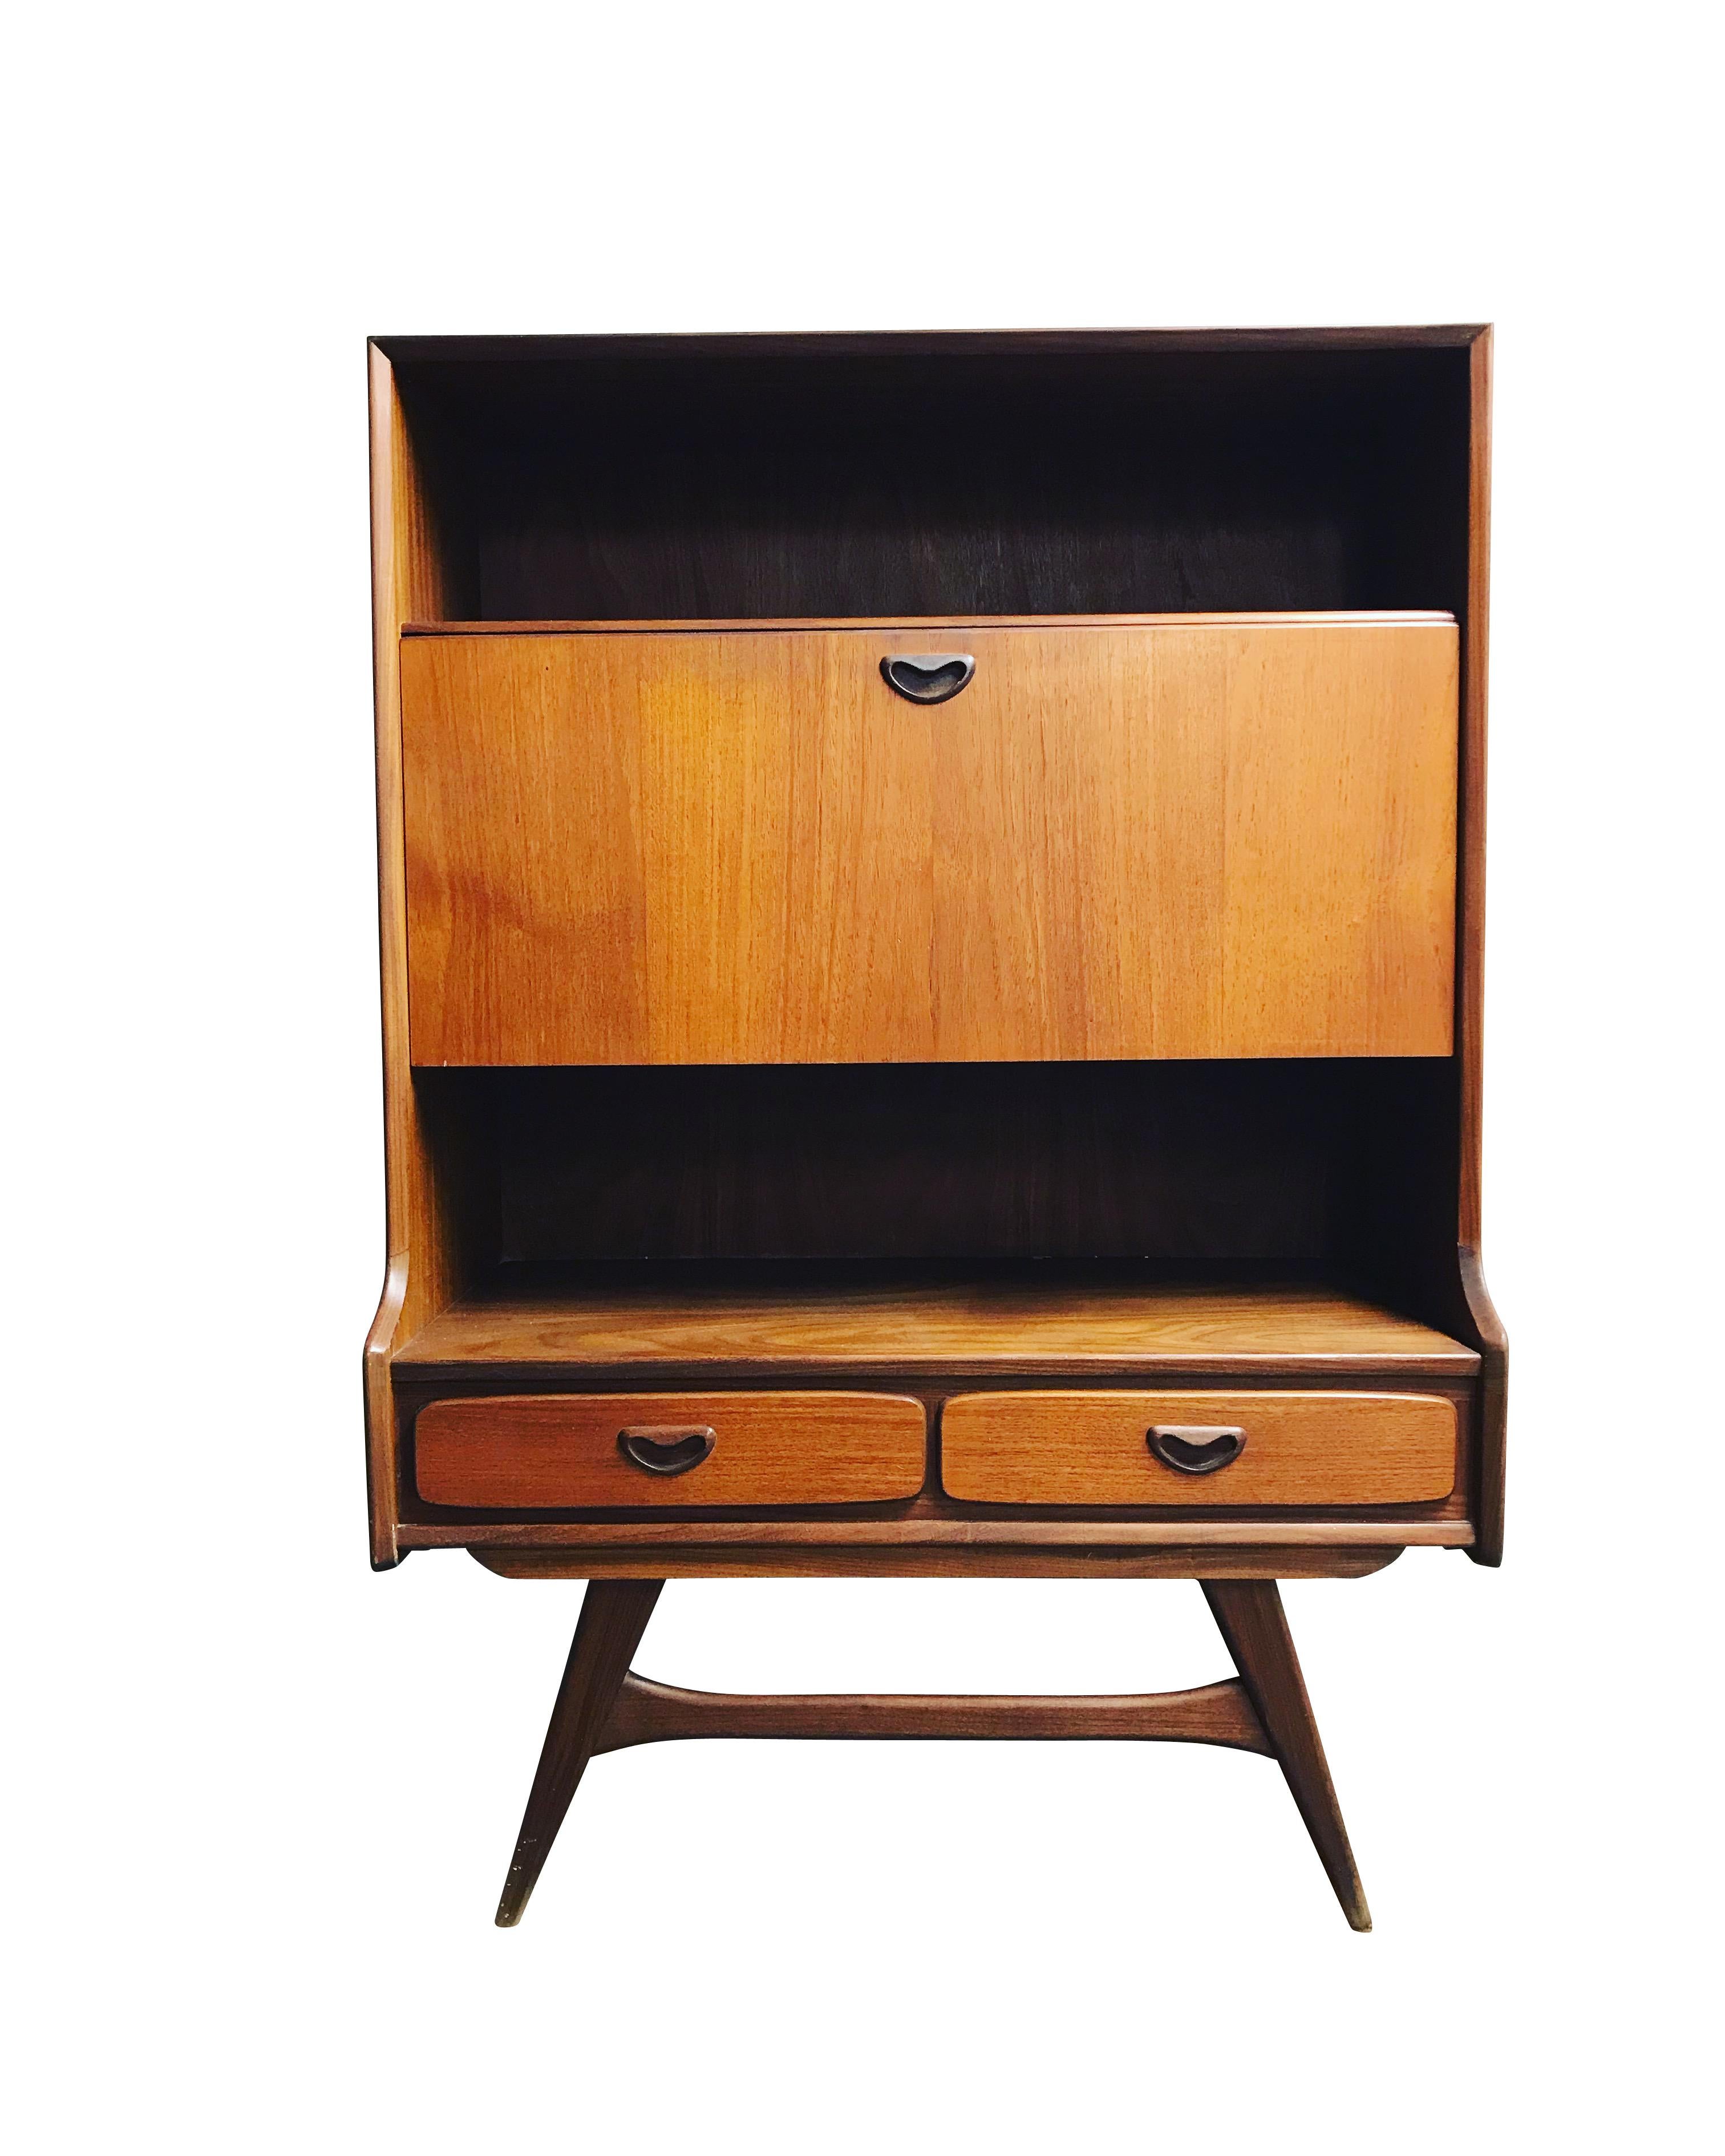 This teak secretary/bar cabinet was designed by Louis van Teeffelen during the 1960s and was made by Wébé in the Netherlands. It features an open top compartment, a middle storage space with two shelves and two drawers.

Beautiful design with